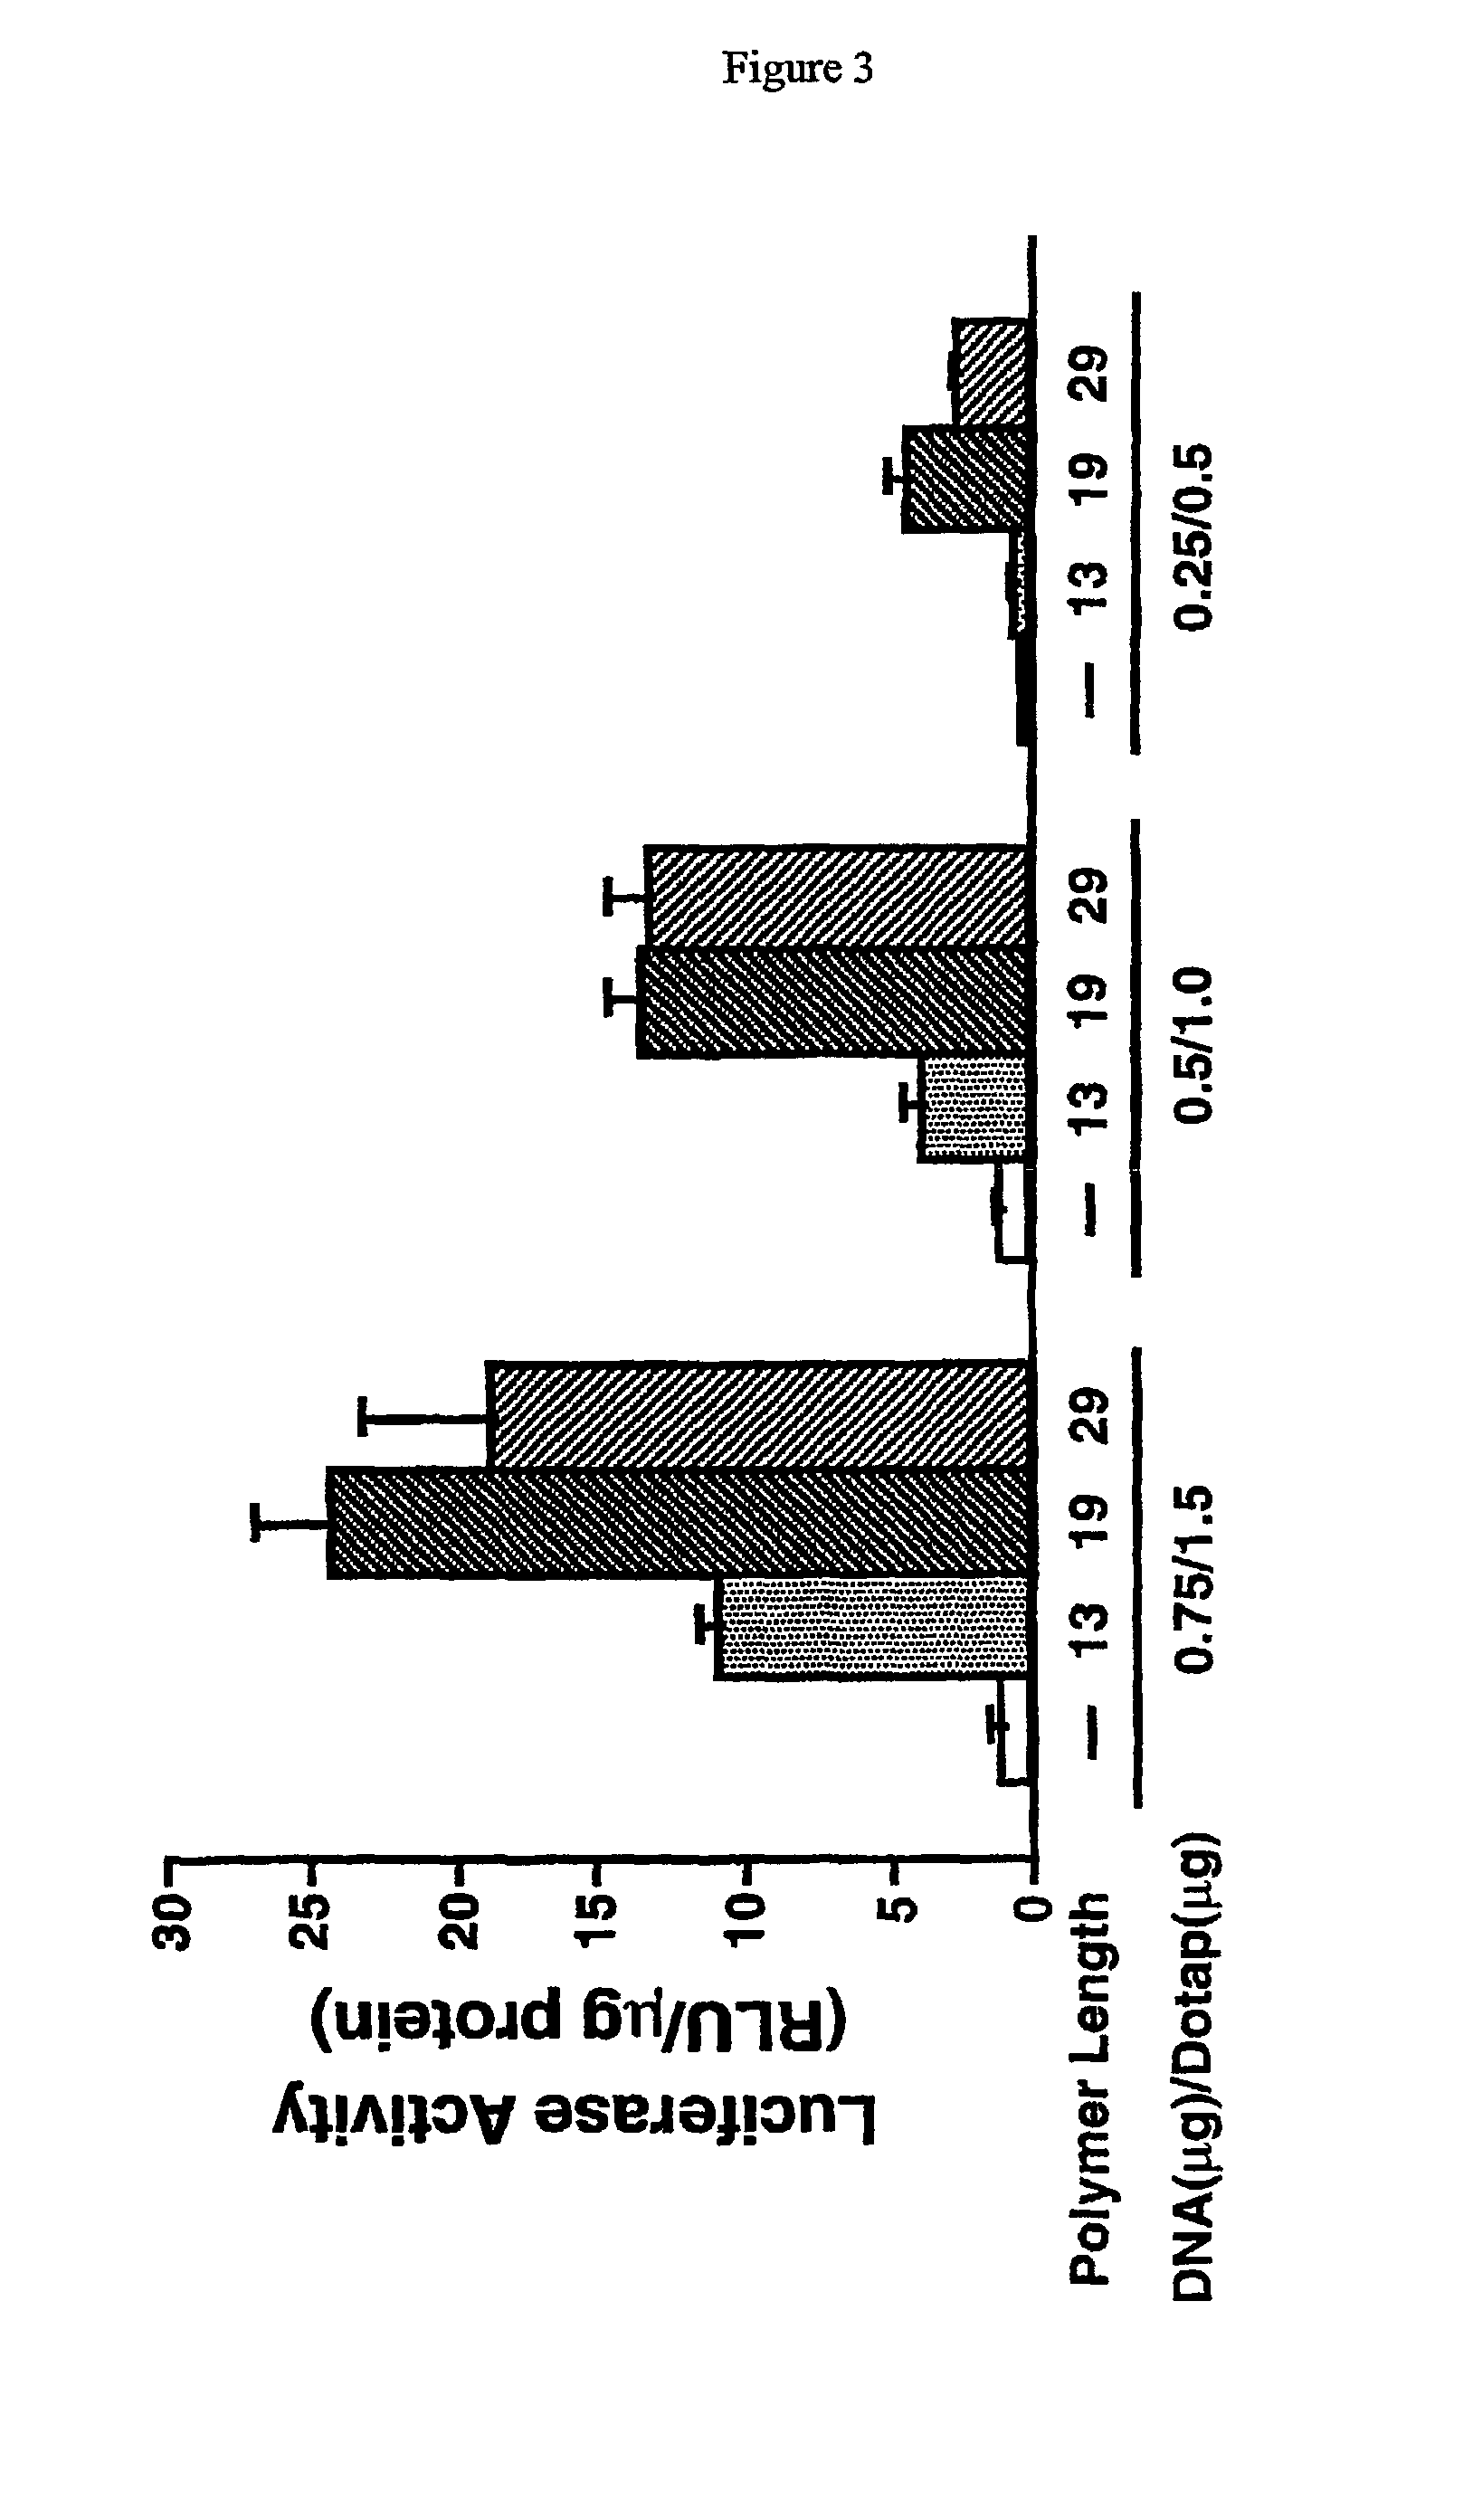 Histidine copolymer and methods for using same